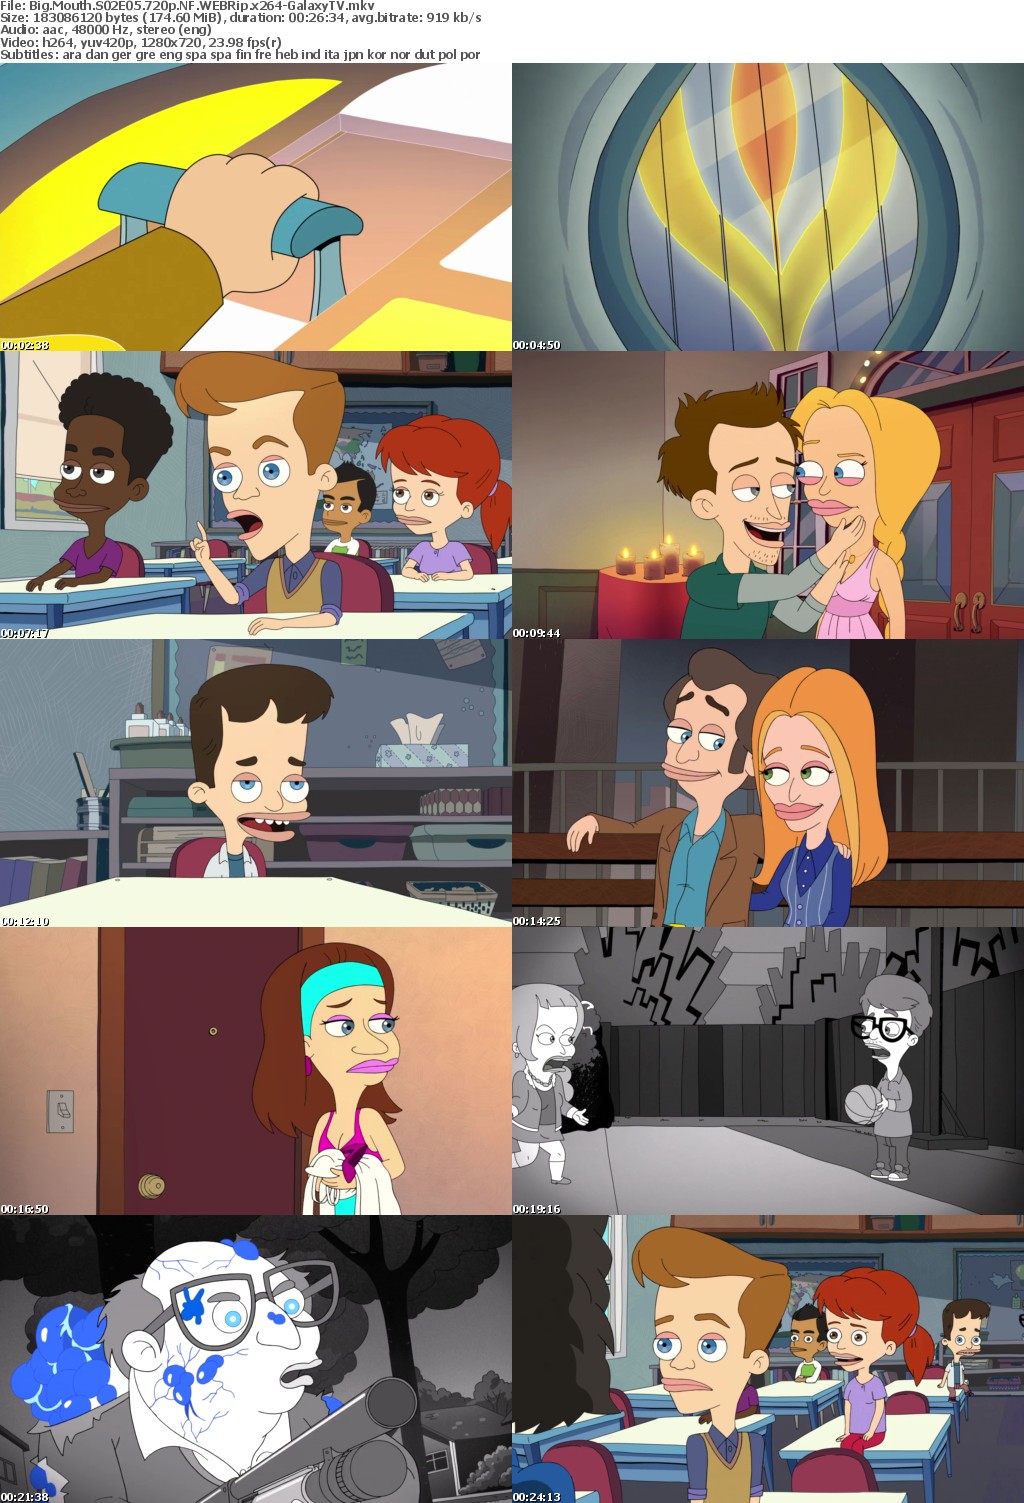 Big Mouth S02 COMPLETE 720p NF WEBRip x264-GalaxyTV